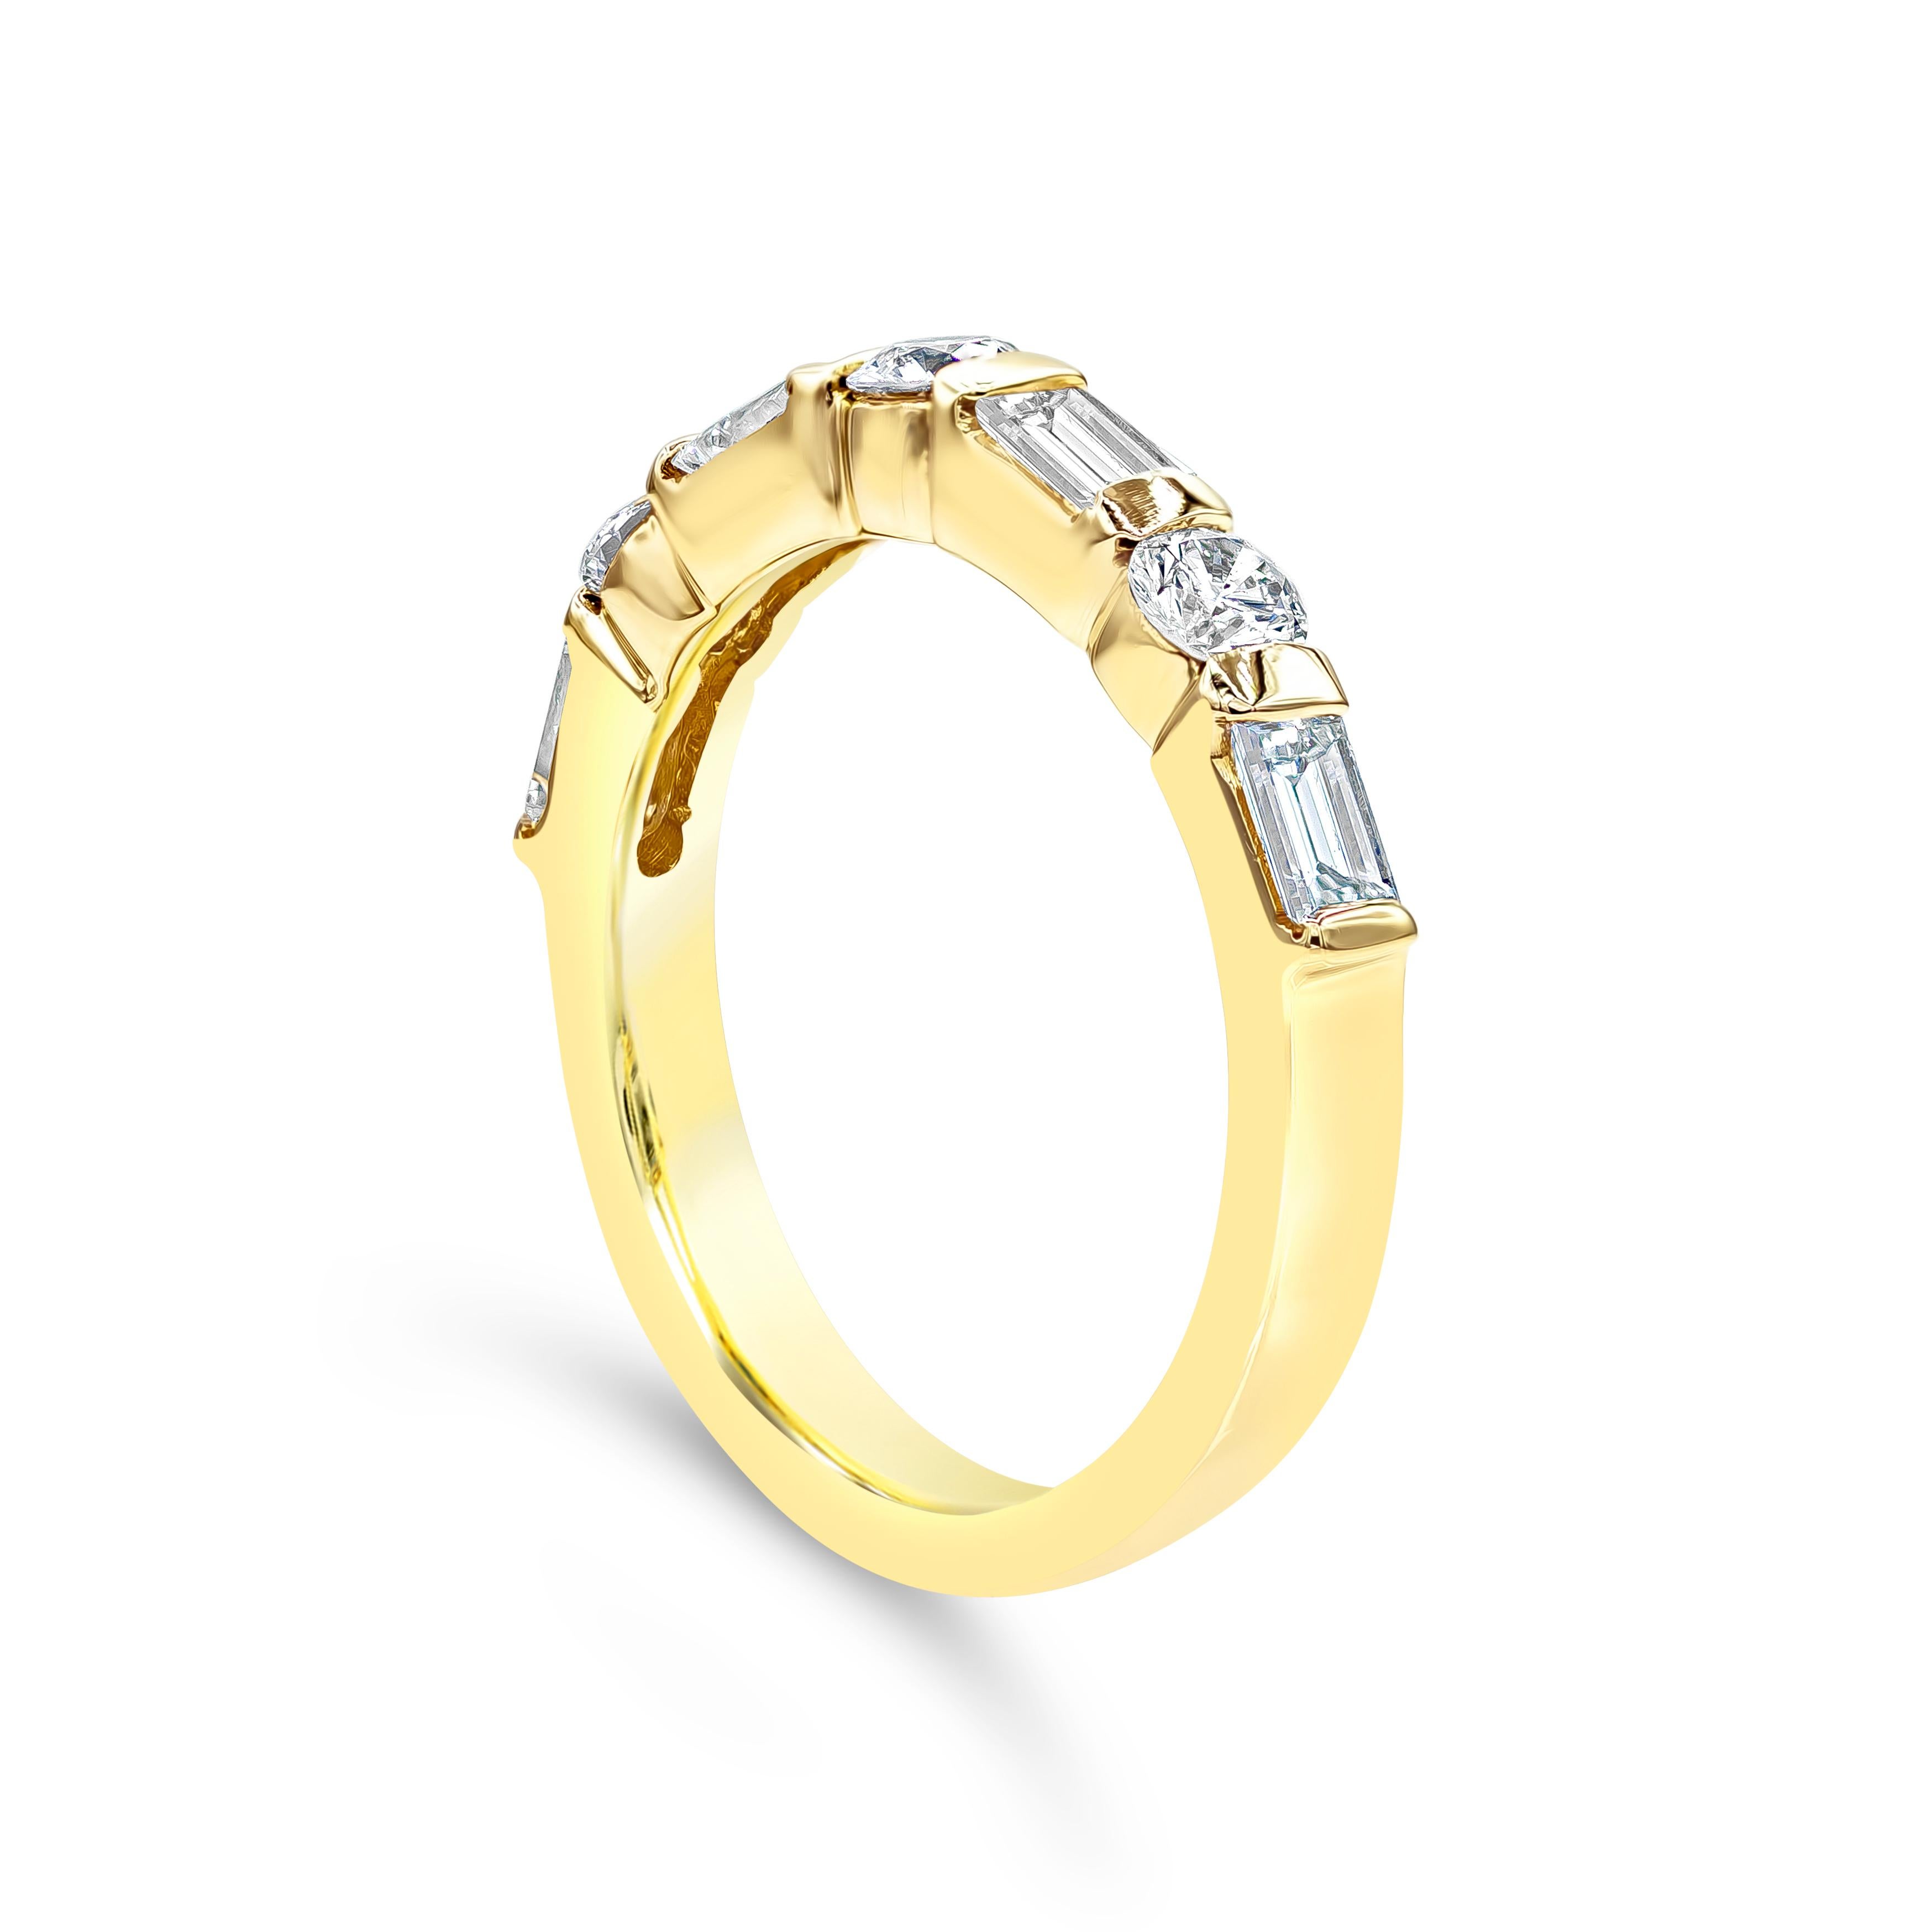 Features a half eternity seven-stone wedding band ring showcasing baguette diamonds weighing 0.51 carats, elegantly alternates with round brilliant diamonds weighing 0.40 carats. Mounted in a bar setting, Made with 14K Yellow Gold. Size 6.5 US.